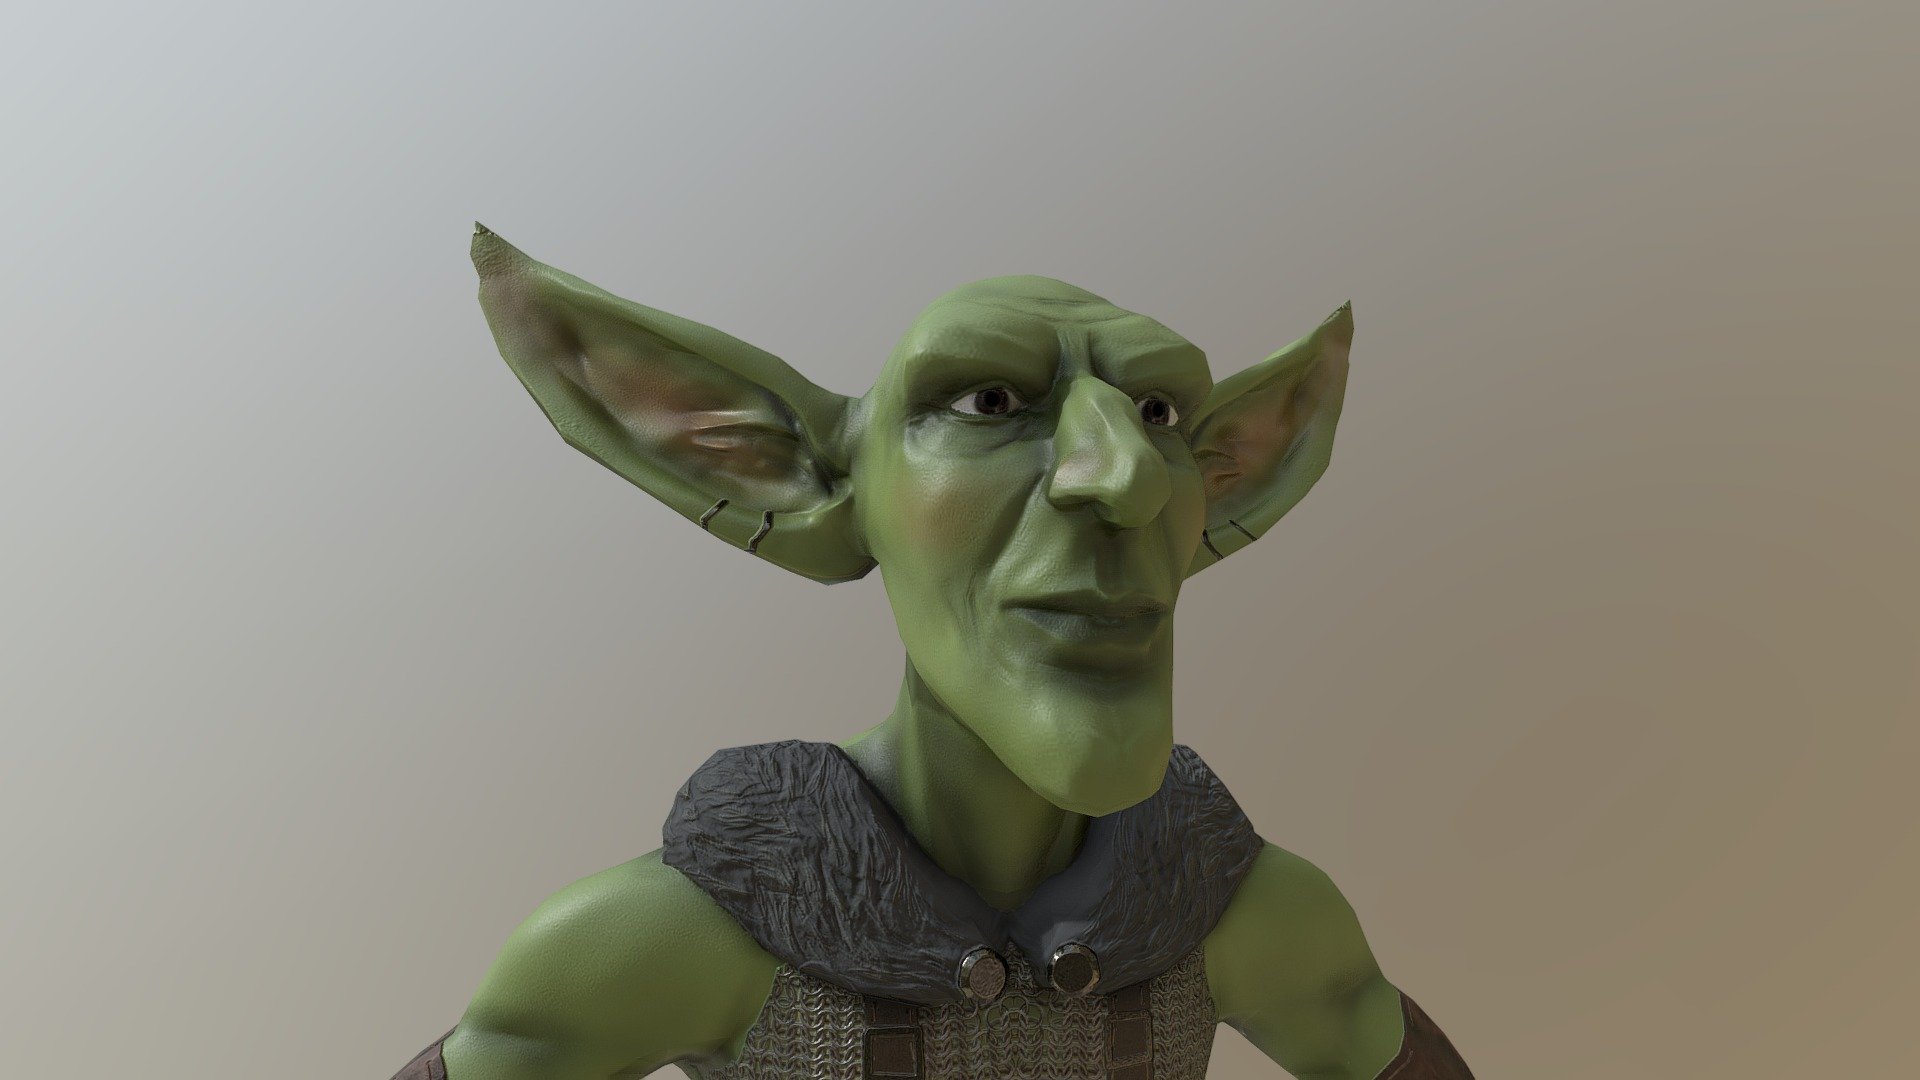 Goblin model for a game me and my friends are working on - Goblin - 3D model by cansutanpolat 3d model